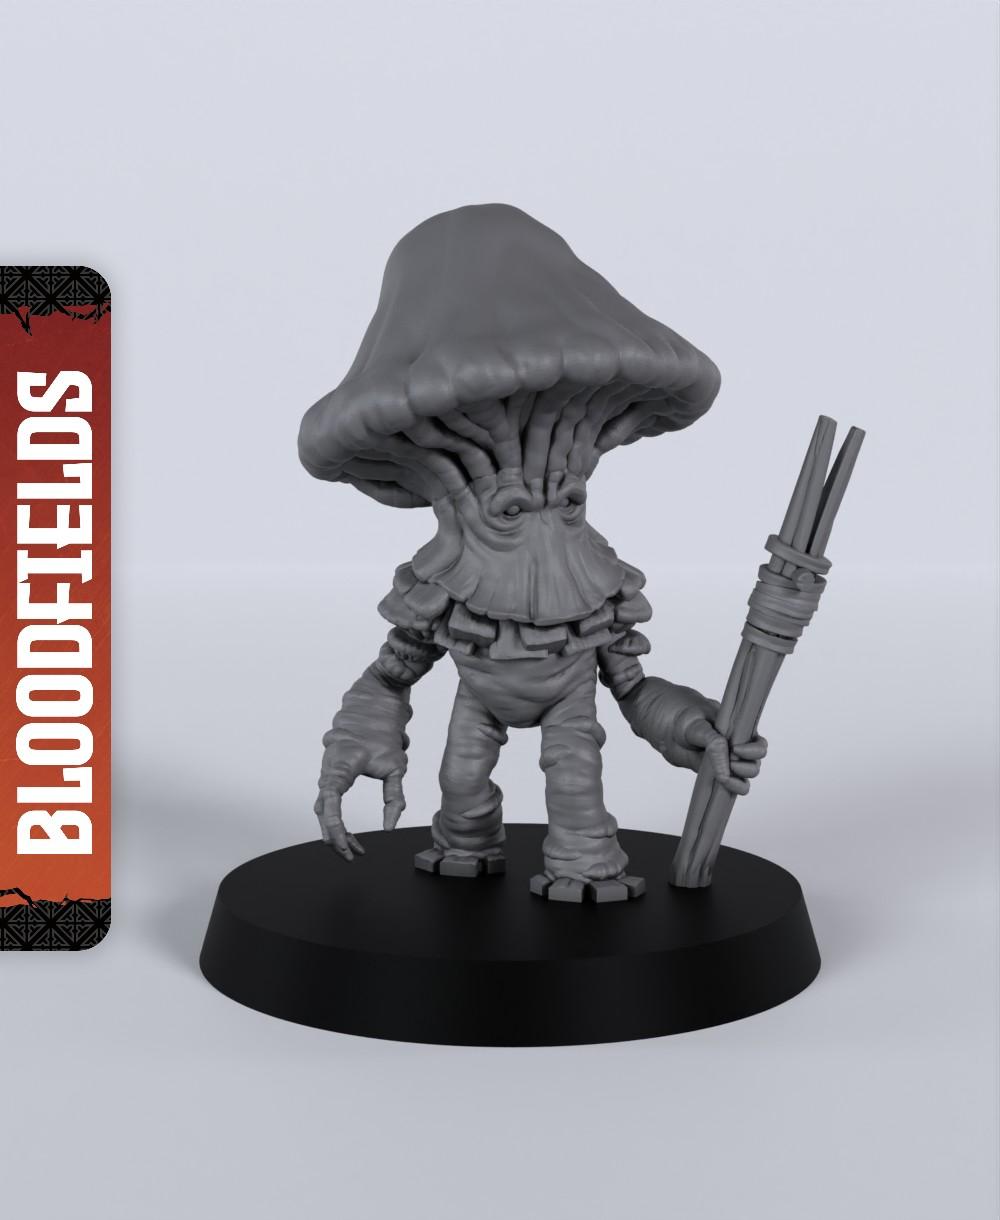 Shroom Thug - With Free Dragon Warhammer - 5e DnD Inspired for RPG and Wargamers 3d model